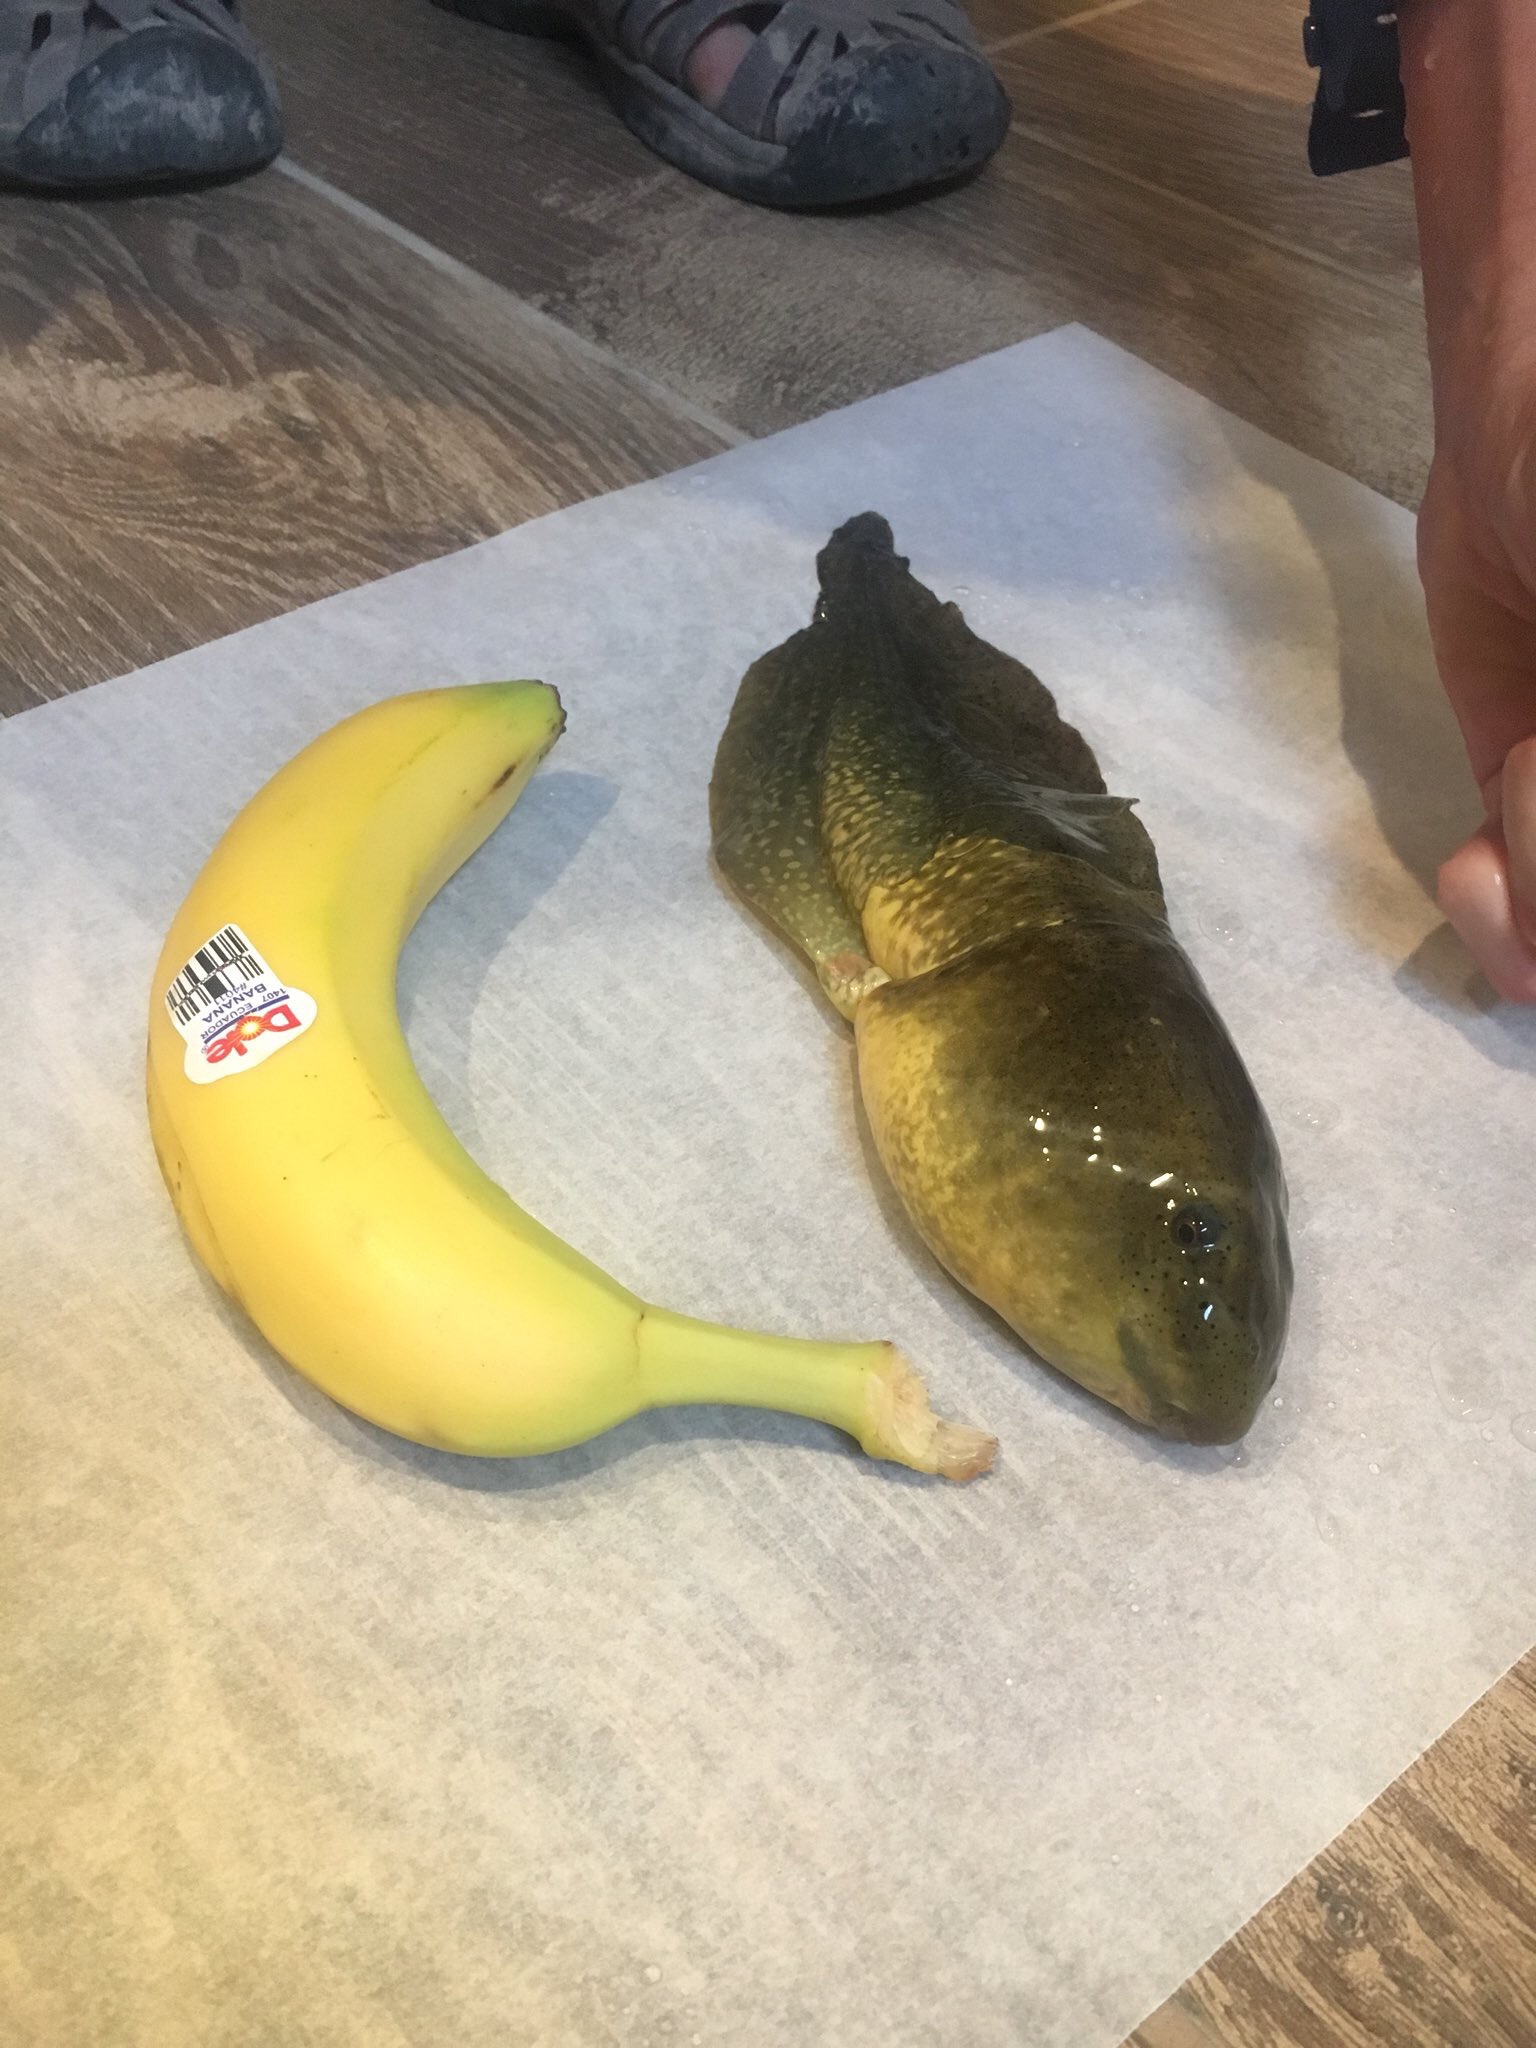 Banana for scale.